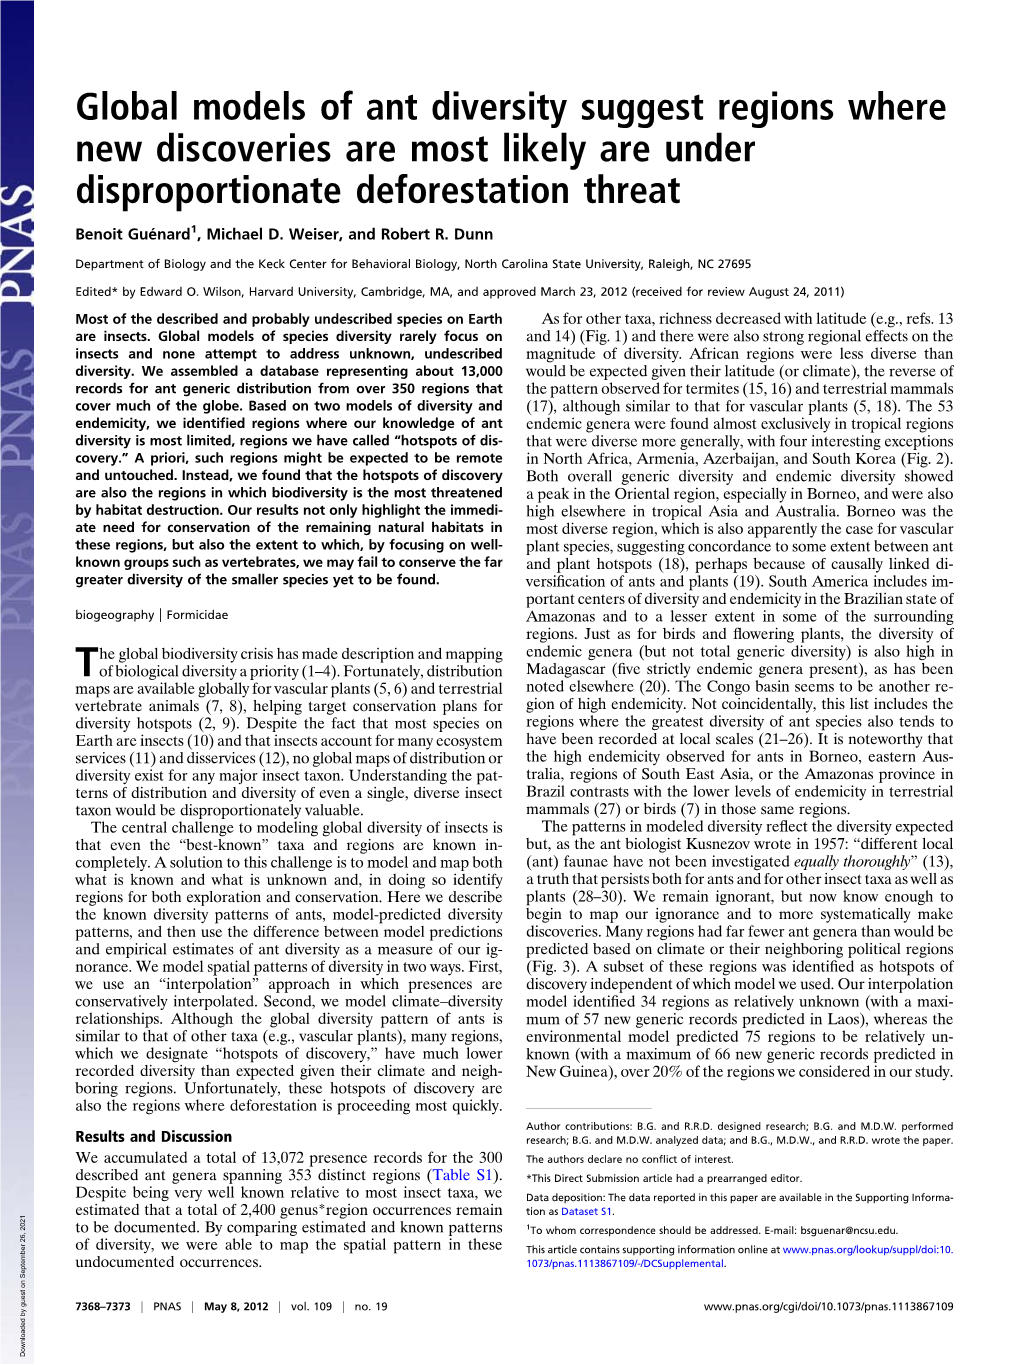 Global Models of Ant Diversity Suggest Regions Where New Discoveries Are Most Likely Are Under Disproportionate Deforestation Threat